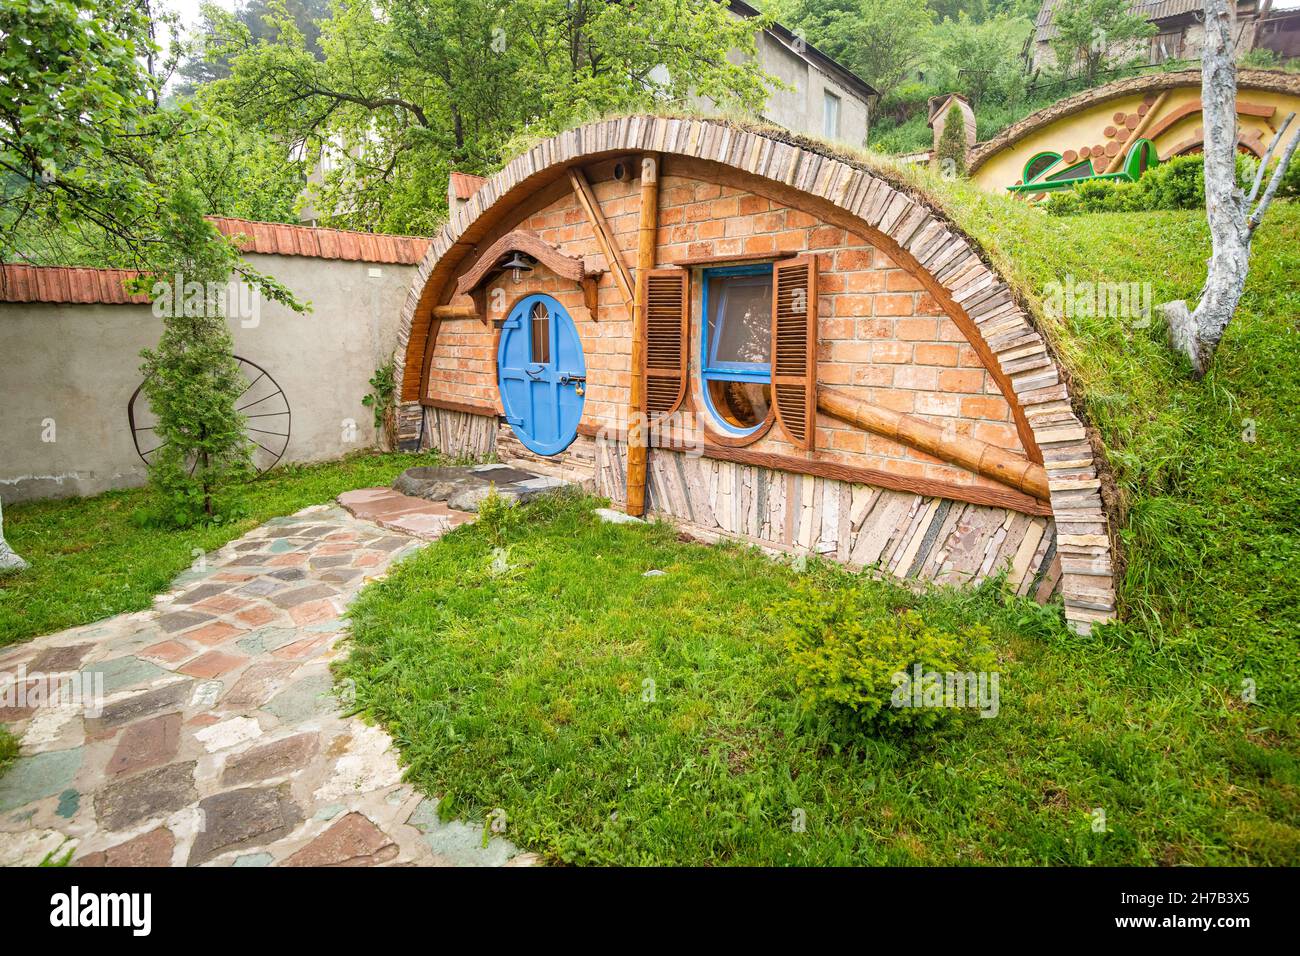 21 May 2021, Hobbit House Dilijan, Armenia: Fairytale hobbit houses in the Shire from the movie The Lord of the Rings. Stock Photo